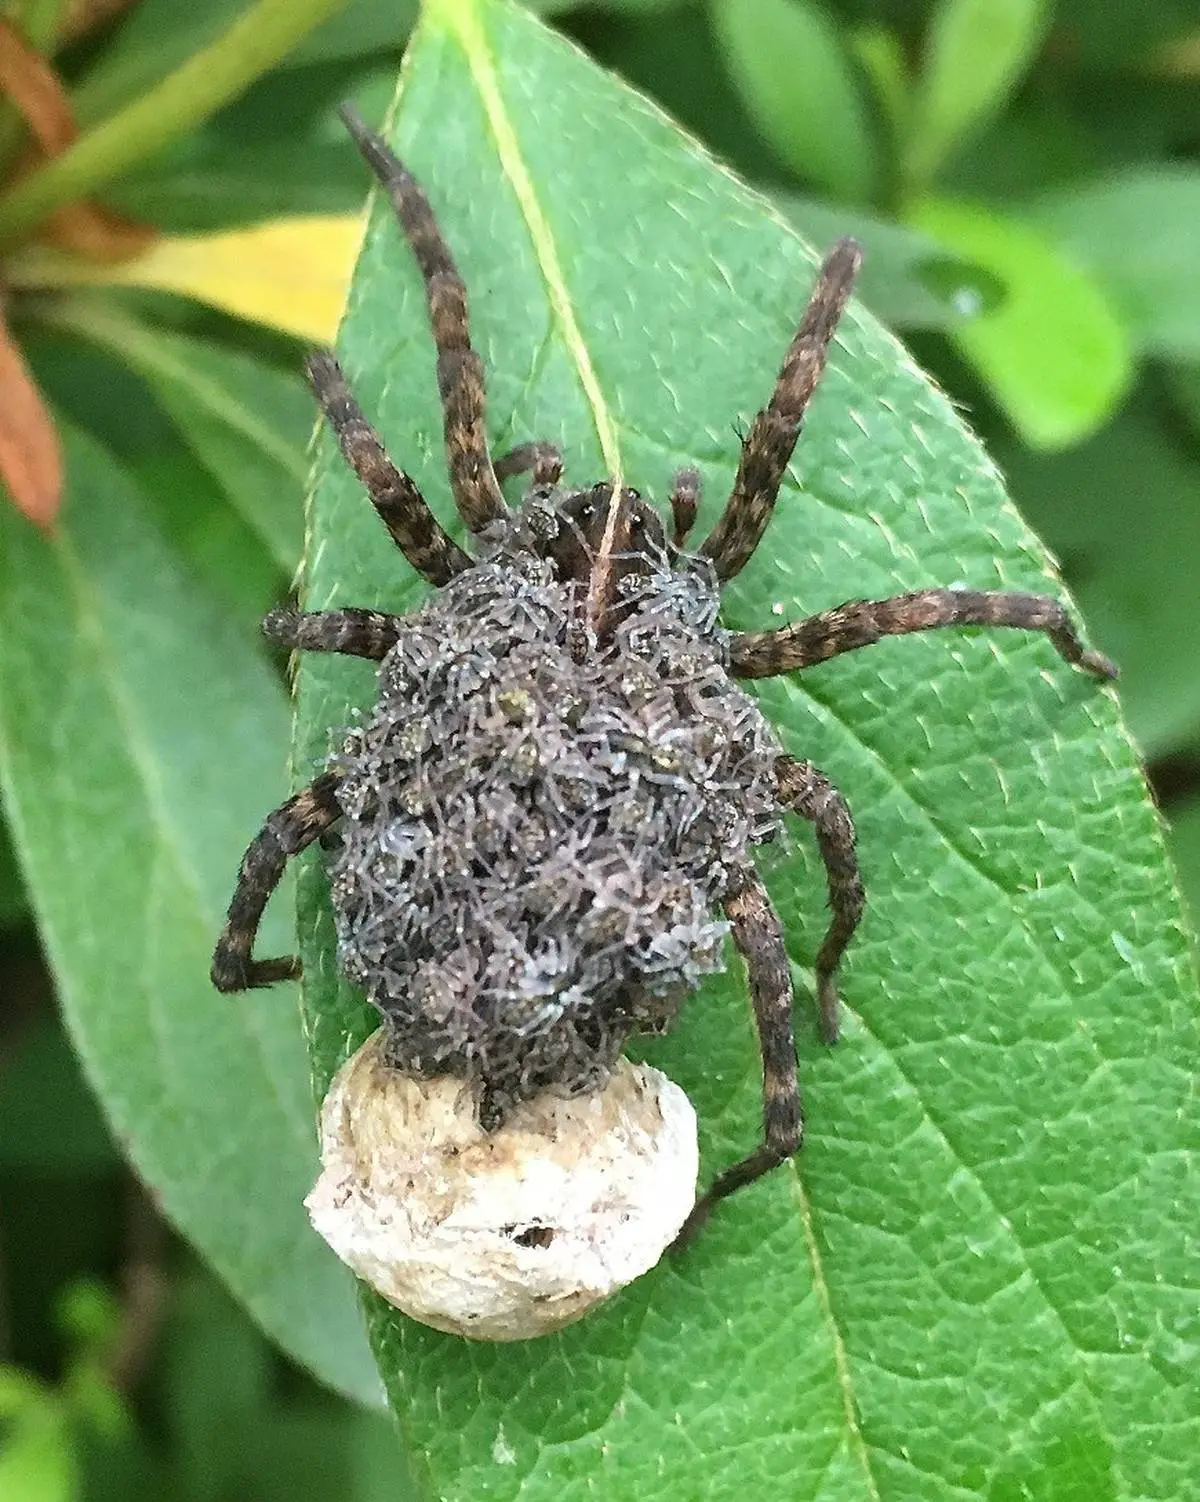 Species Of Spiders That Carry Their Babies On Their Back